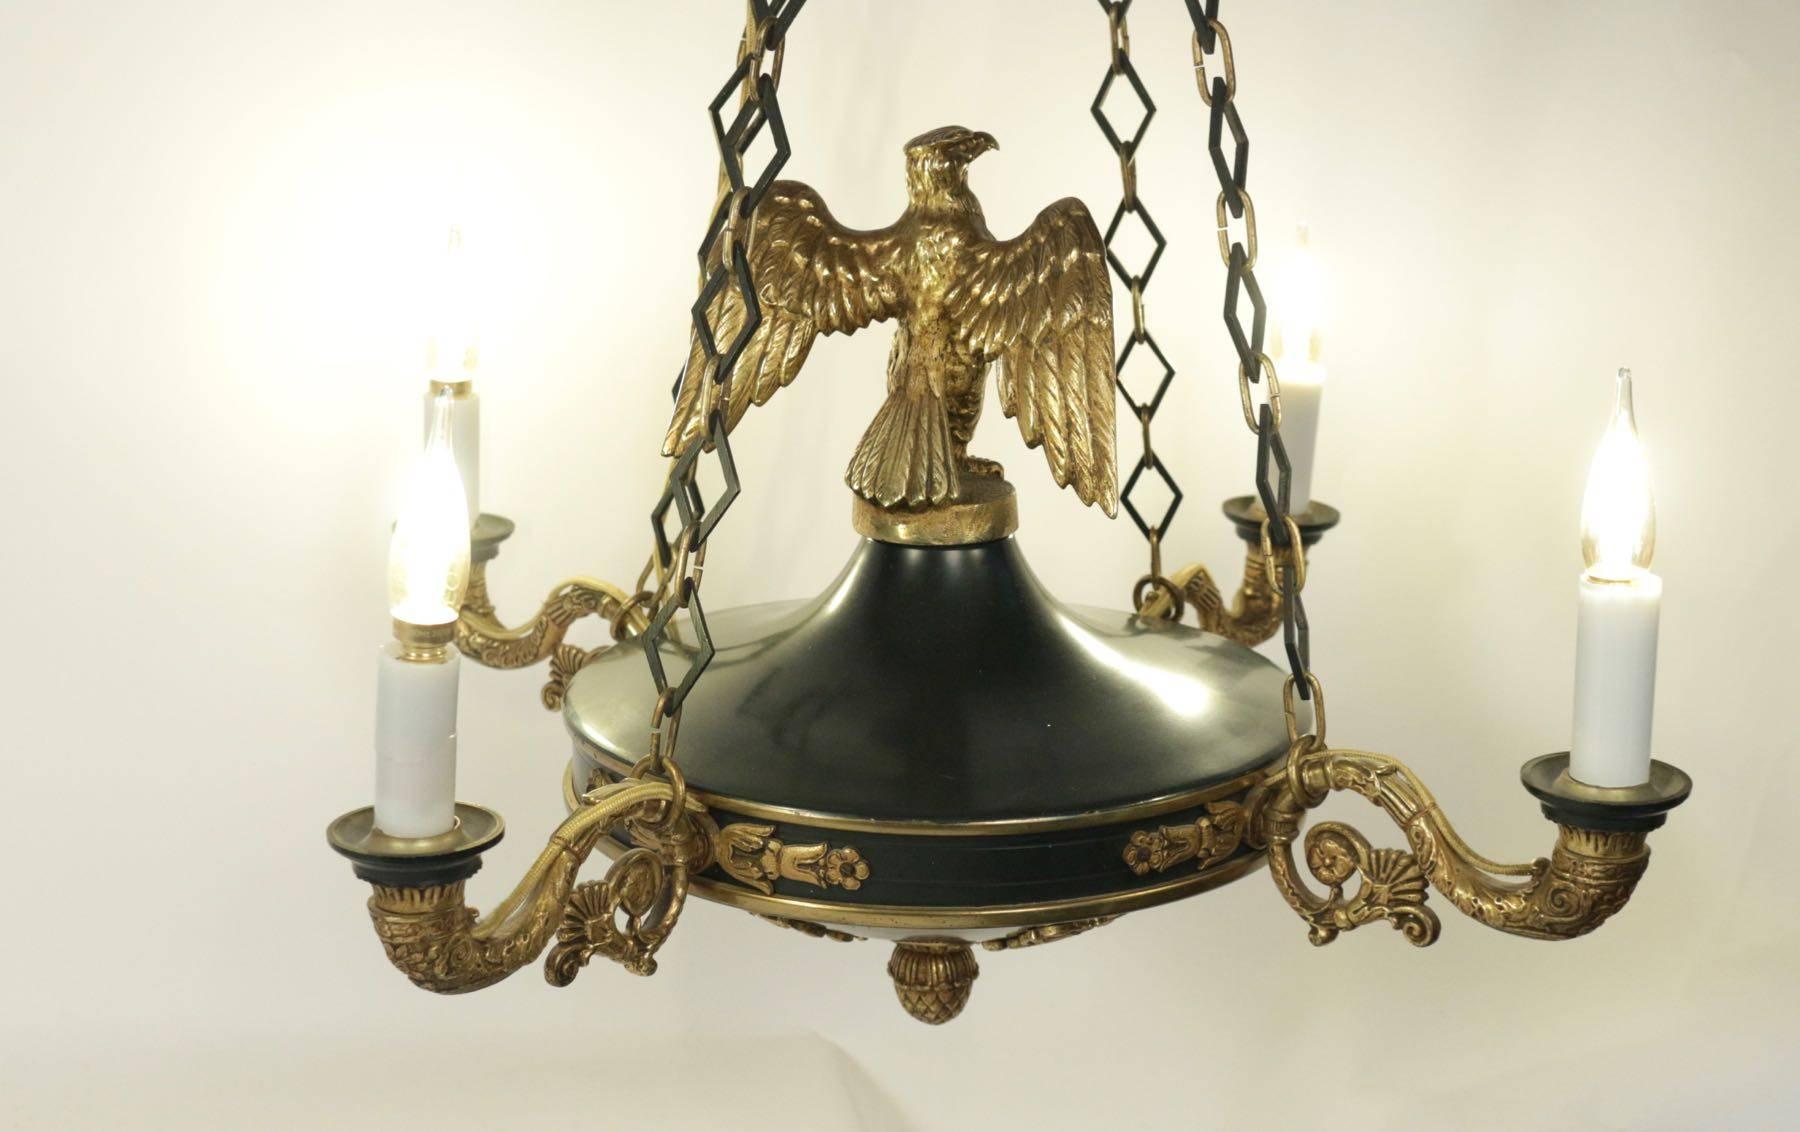 Napoleon III Chandelier Empire Style with an Eagle in Gold Gilt Bronze, 19th Century